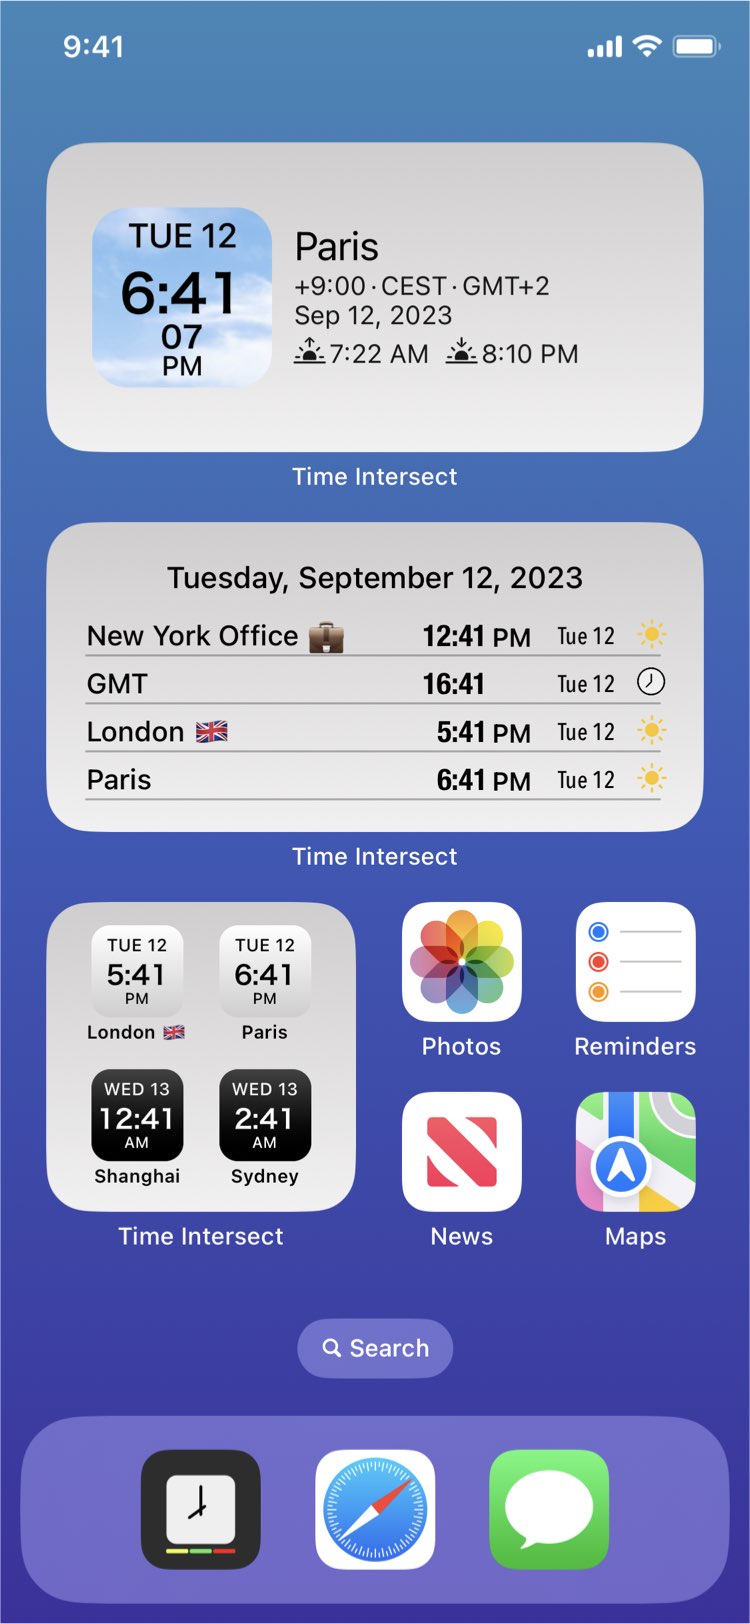 Time Intersect - Smart Meeting Planner